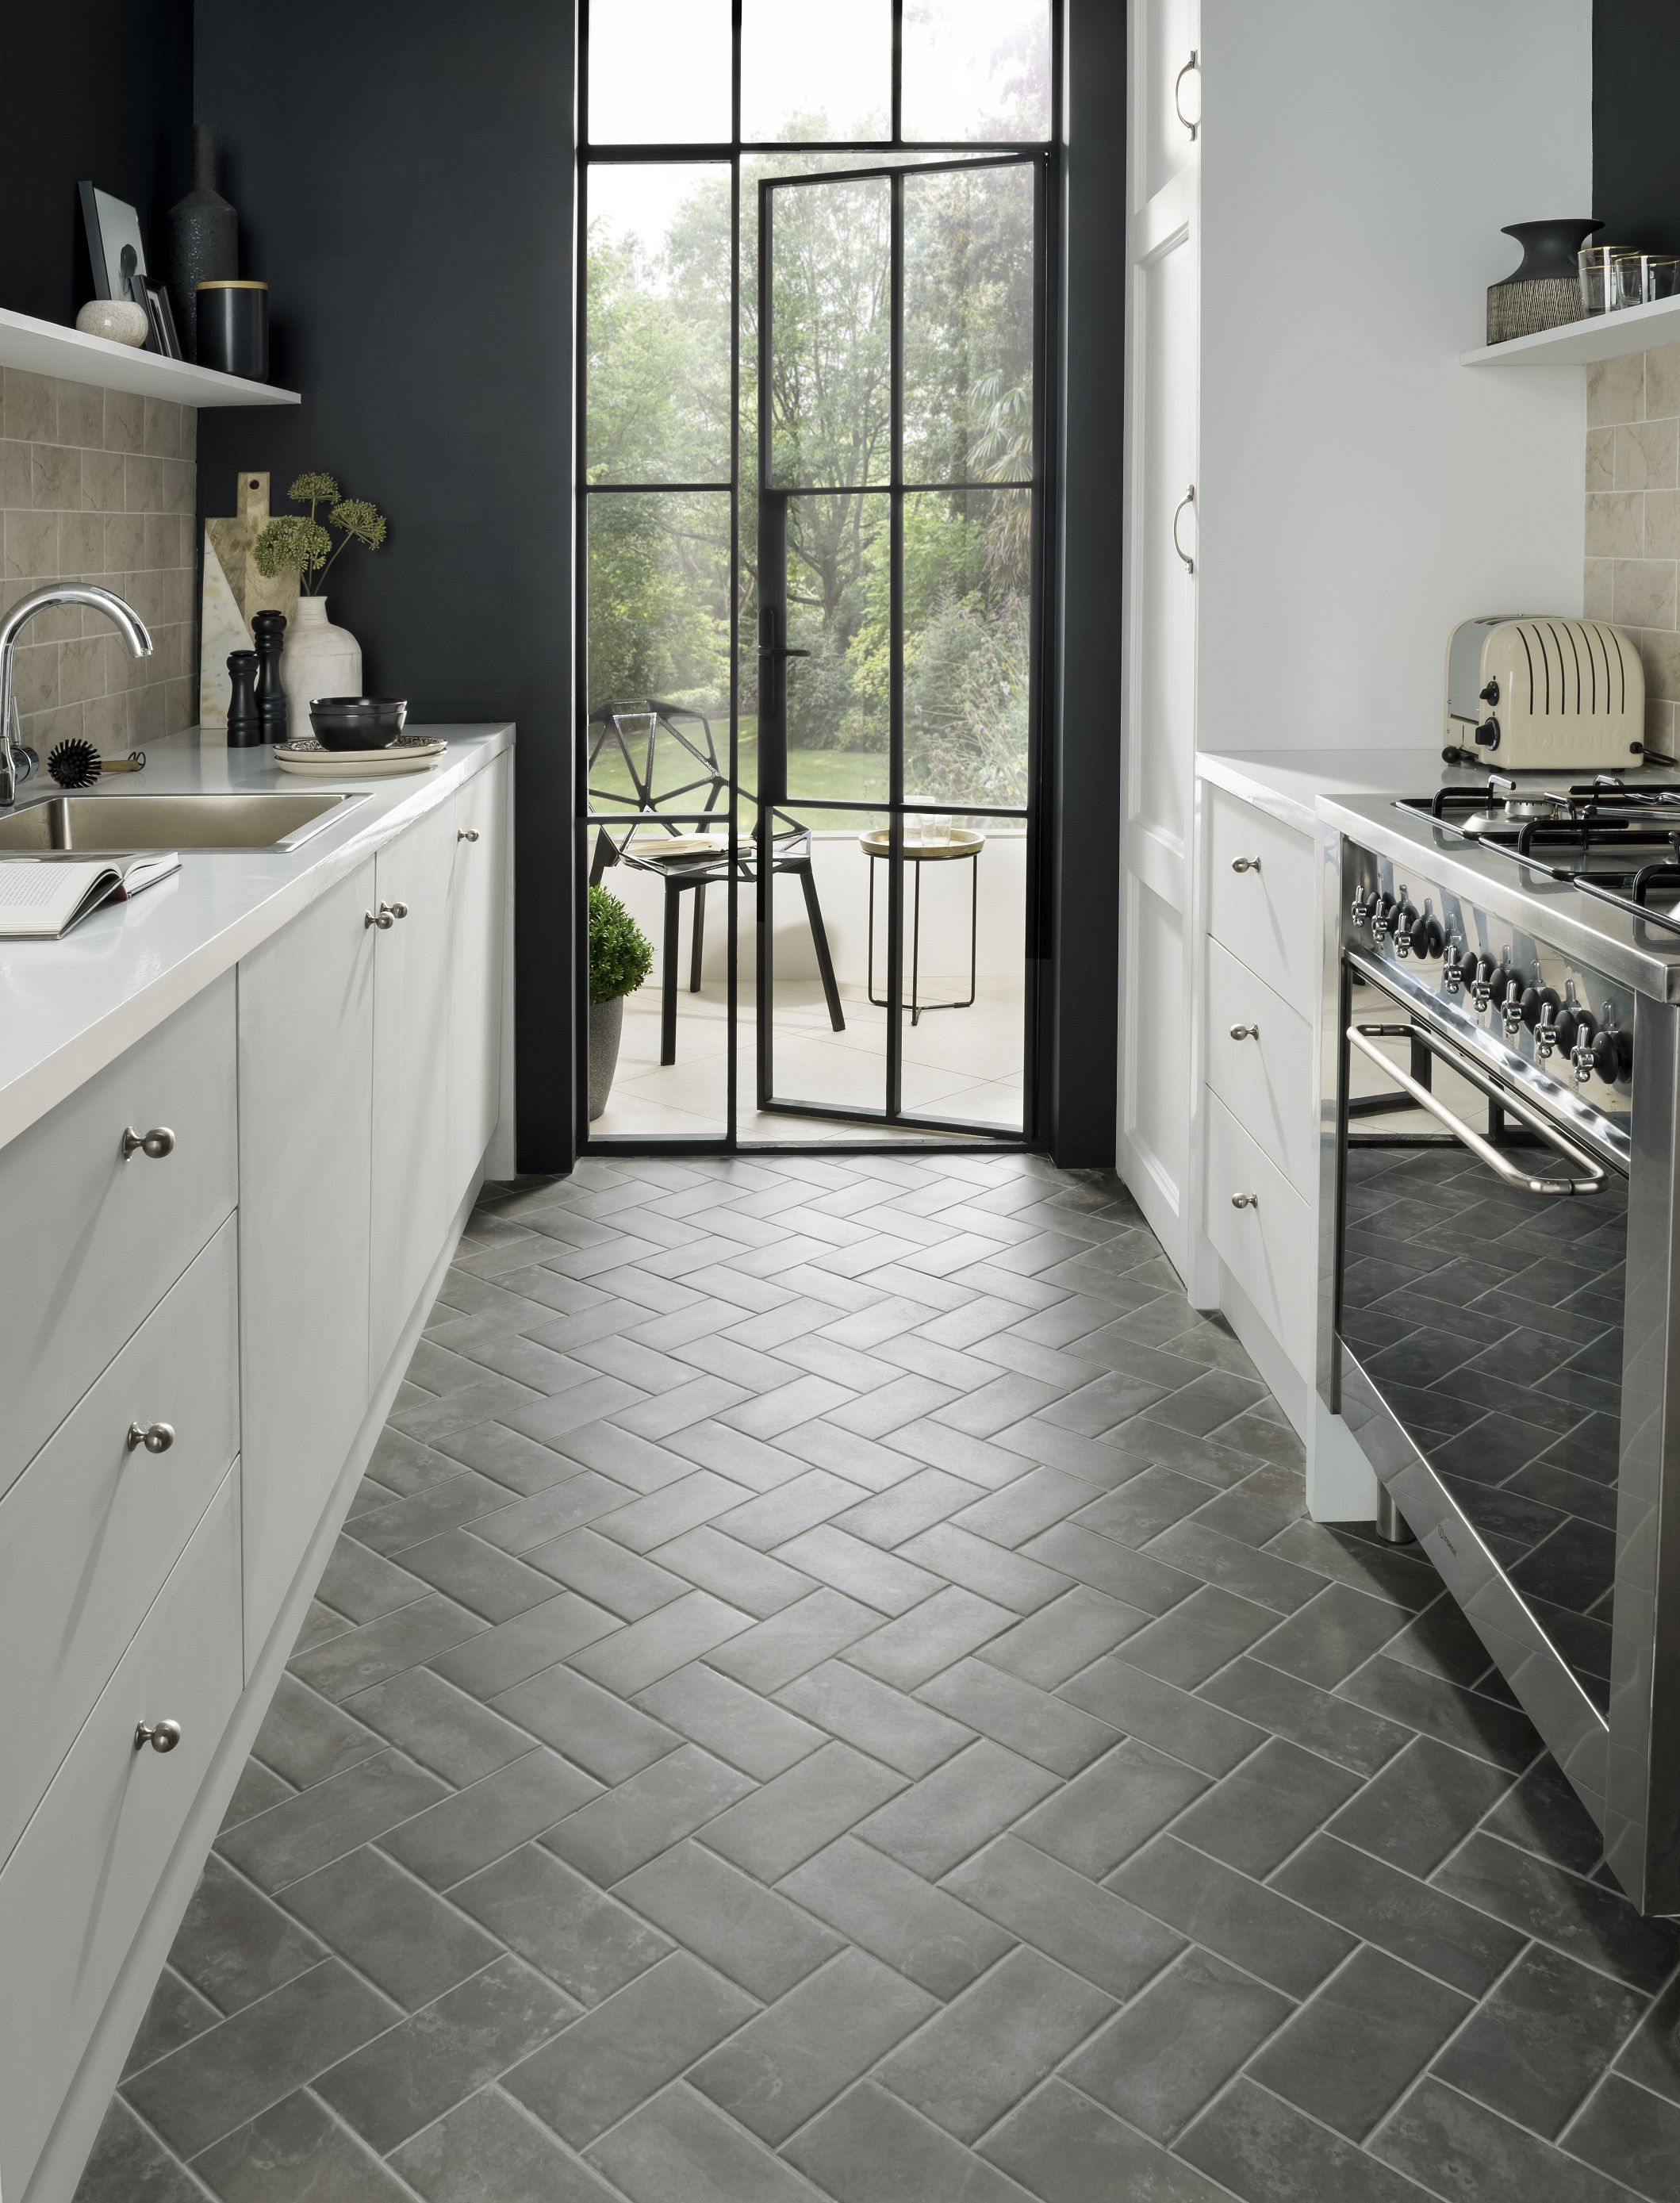 11 Tile Design Ideas To Make A Small Kitchen Feel Bigger throughout dimensions 2118 X 2777